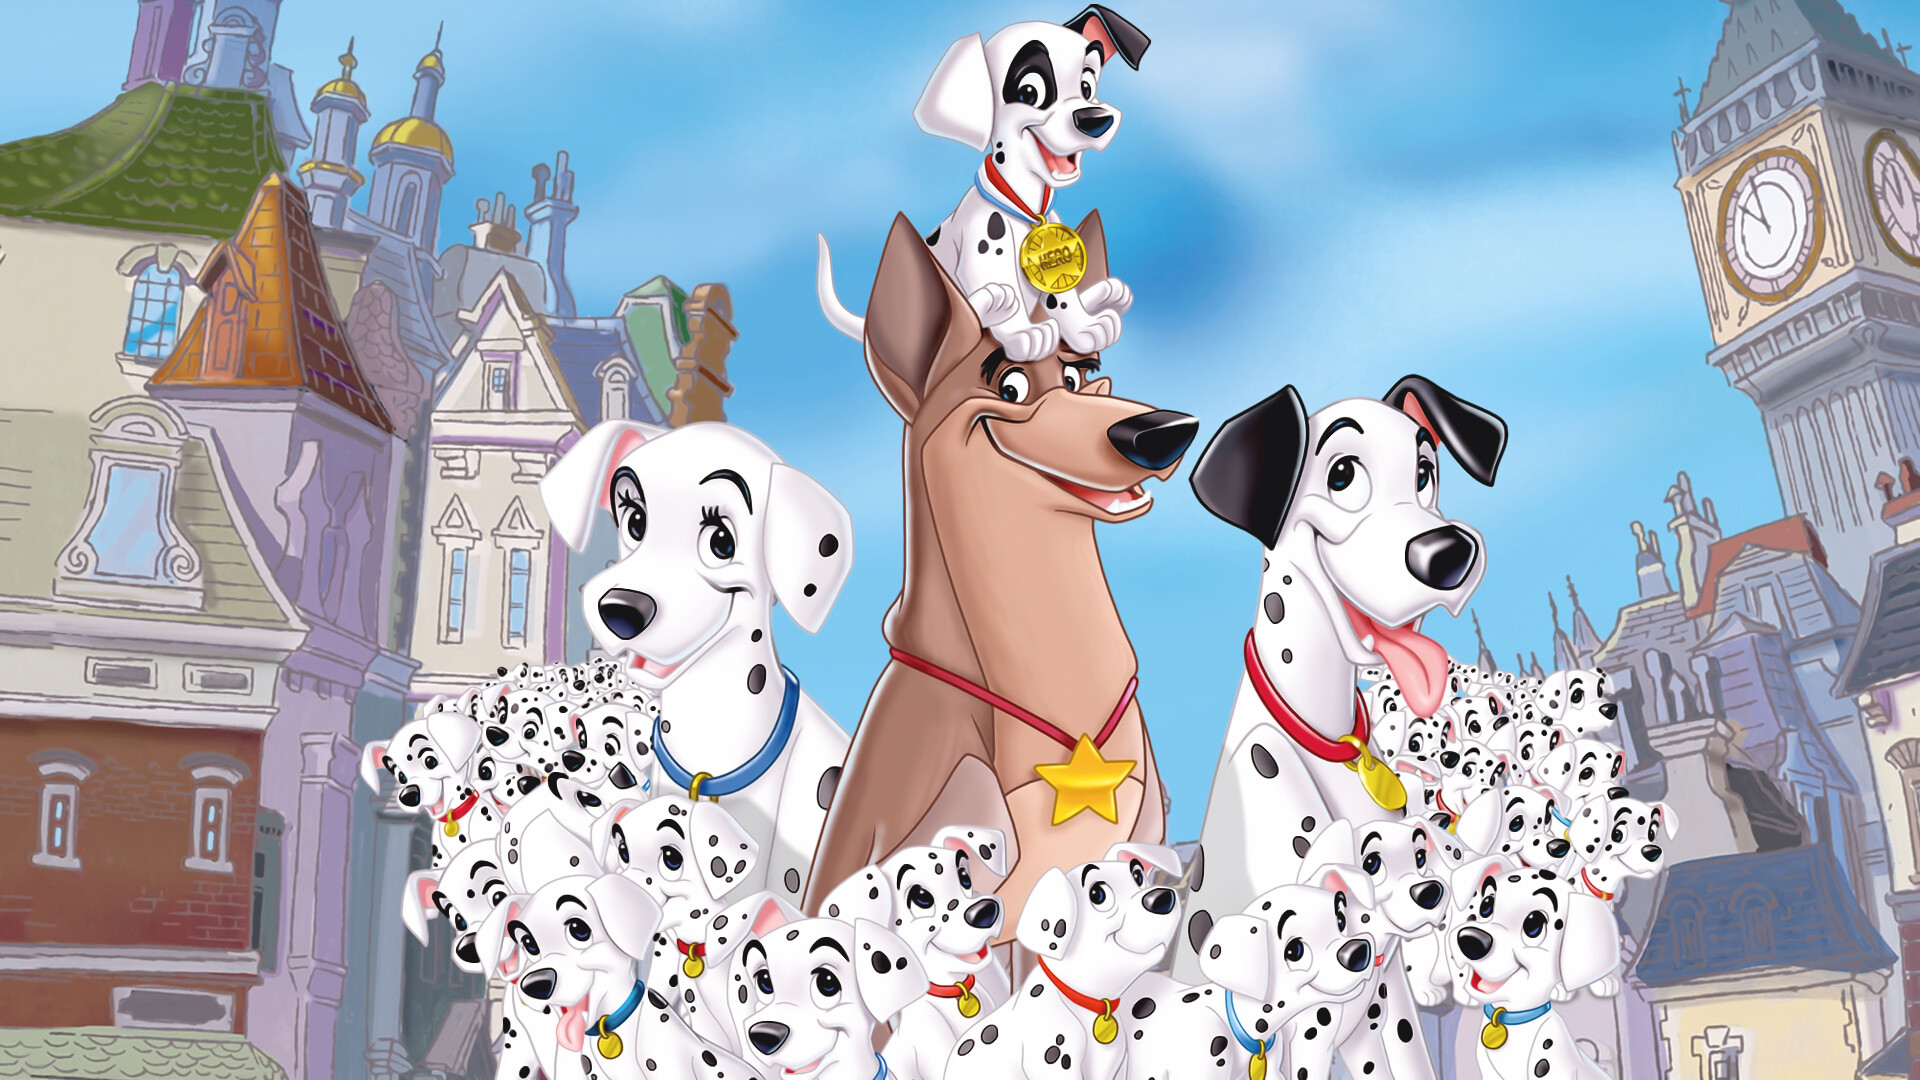 One Hundred and One Dalmatians: The animated feature is about Pongo, a clever Dalmatian, who arranges to get married to the female of his choice, Perdita. 1920x1080 Full HD Wallpaper.